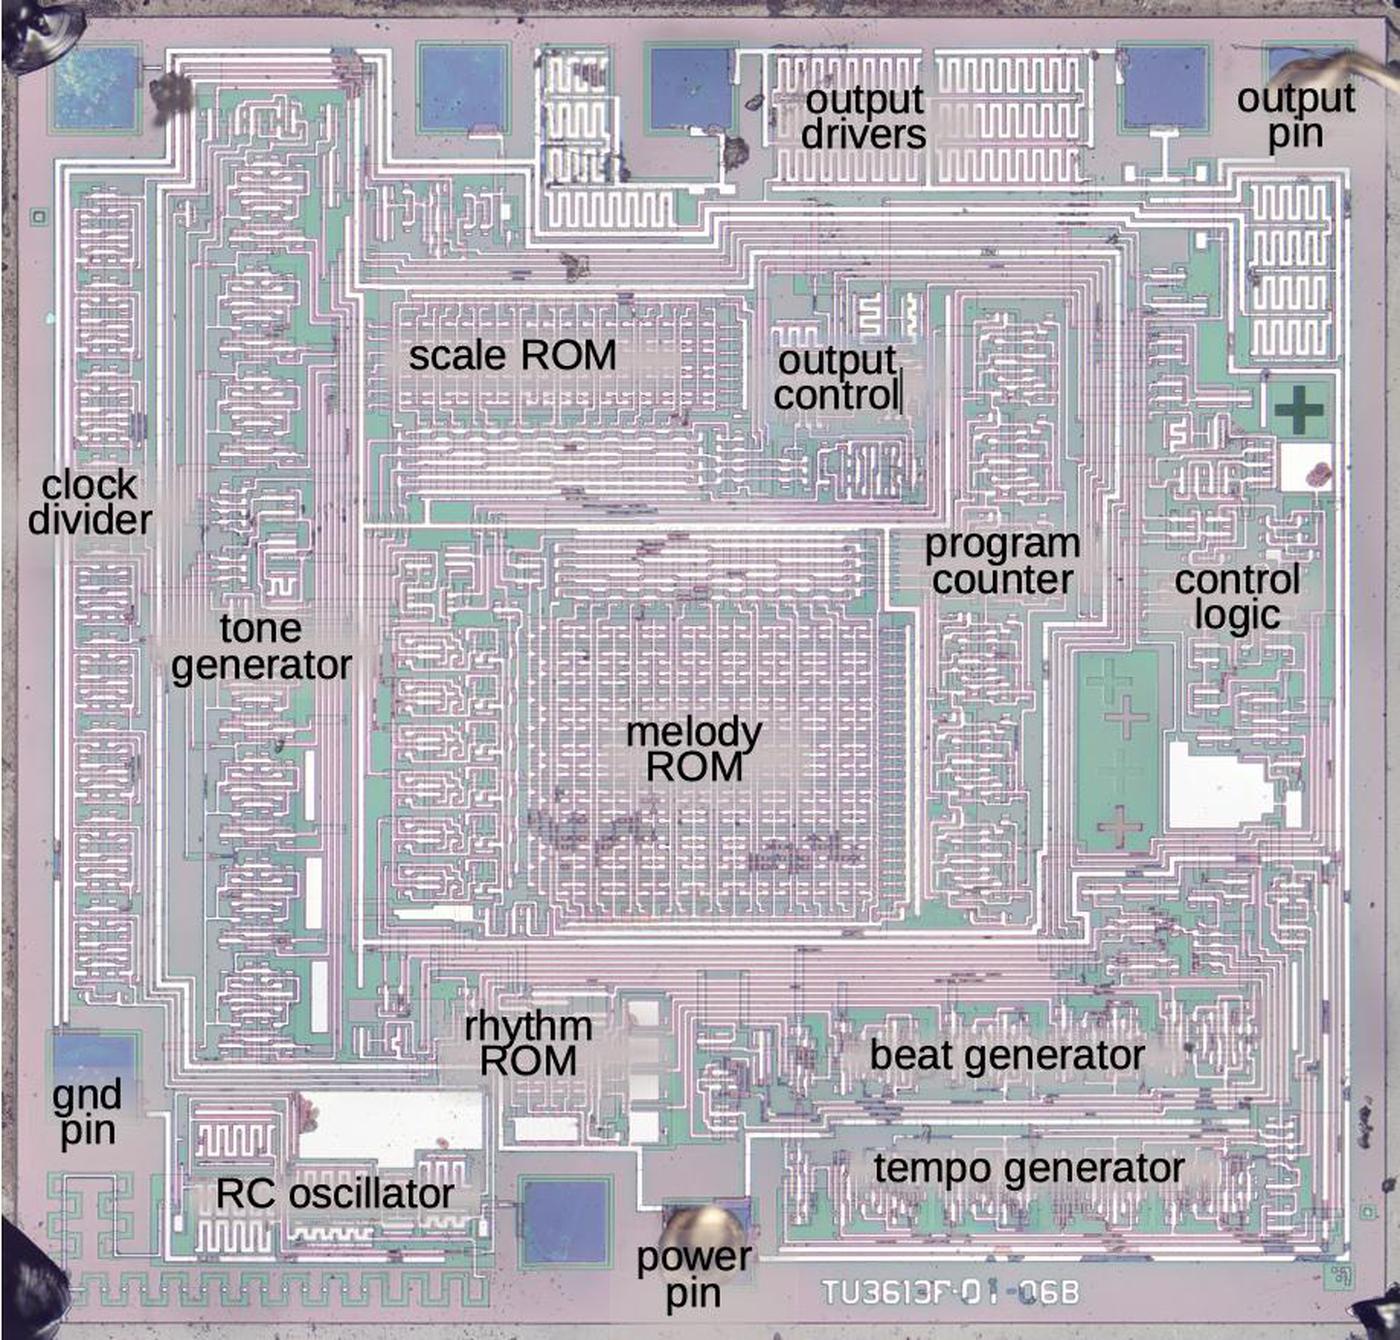 Die photo of the UM66T with the main functional blocks labeled.